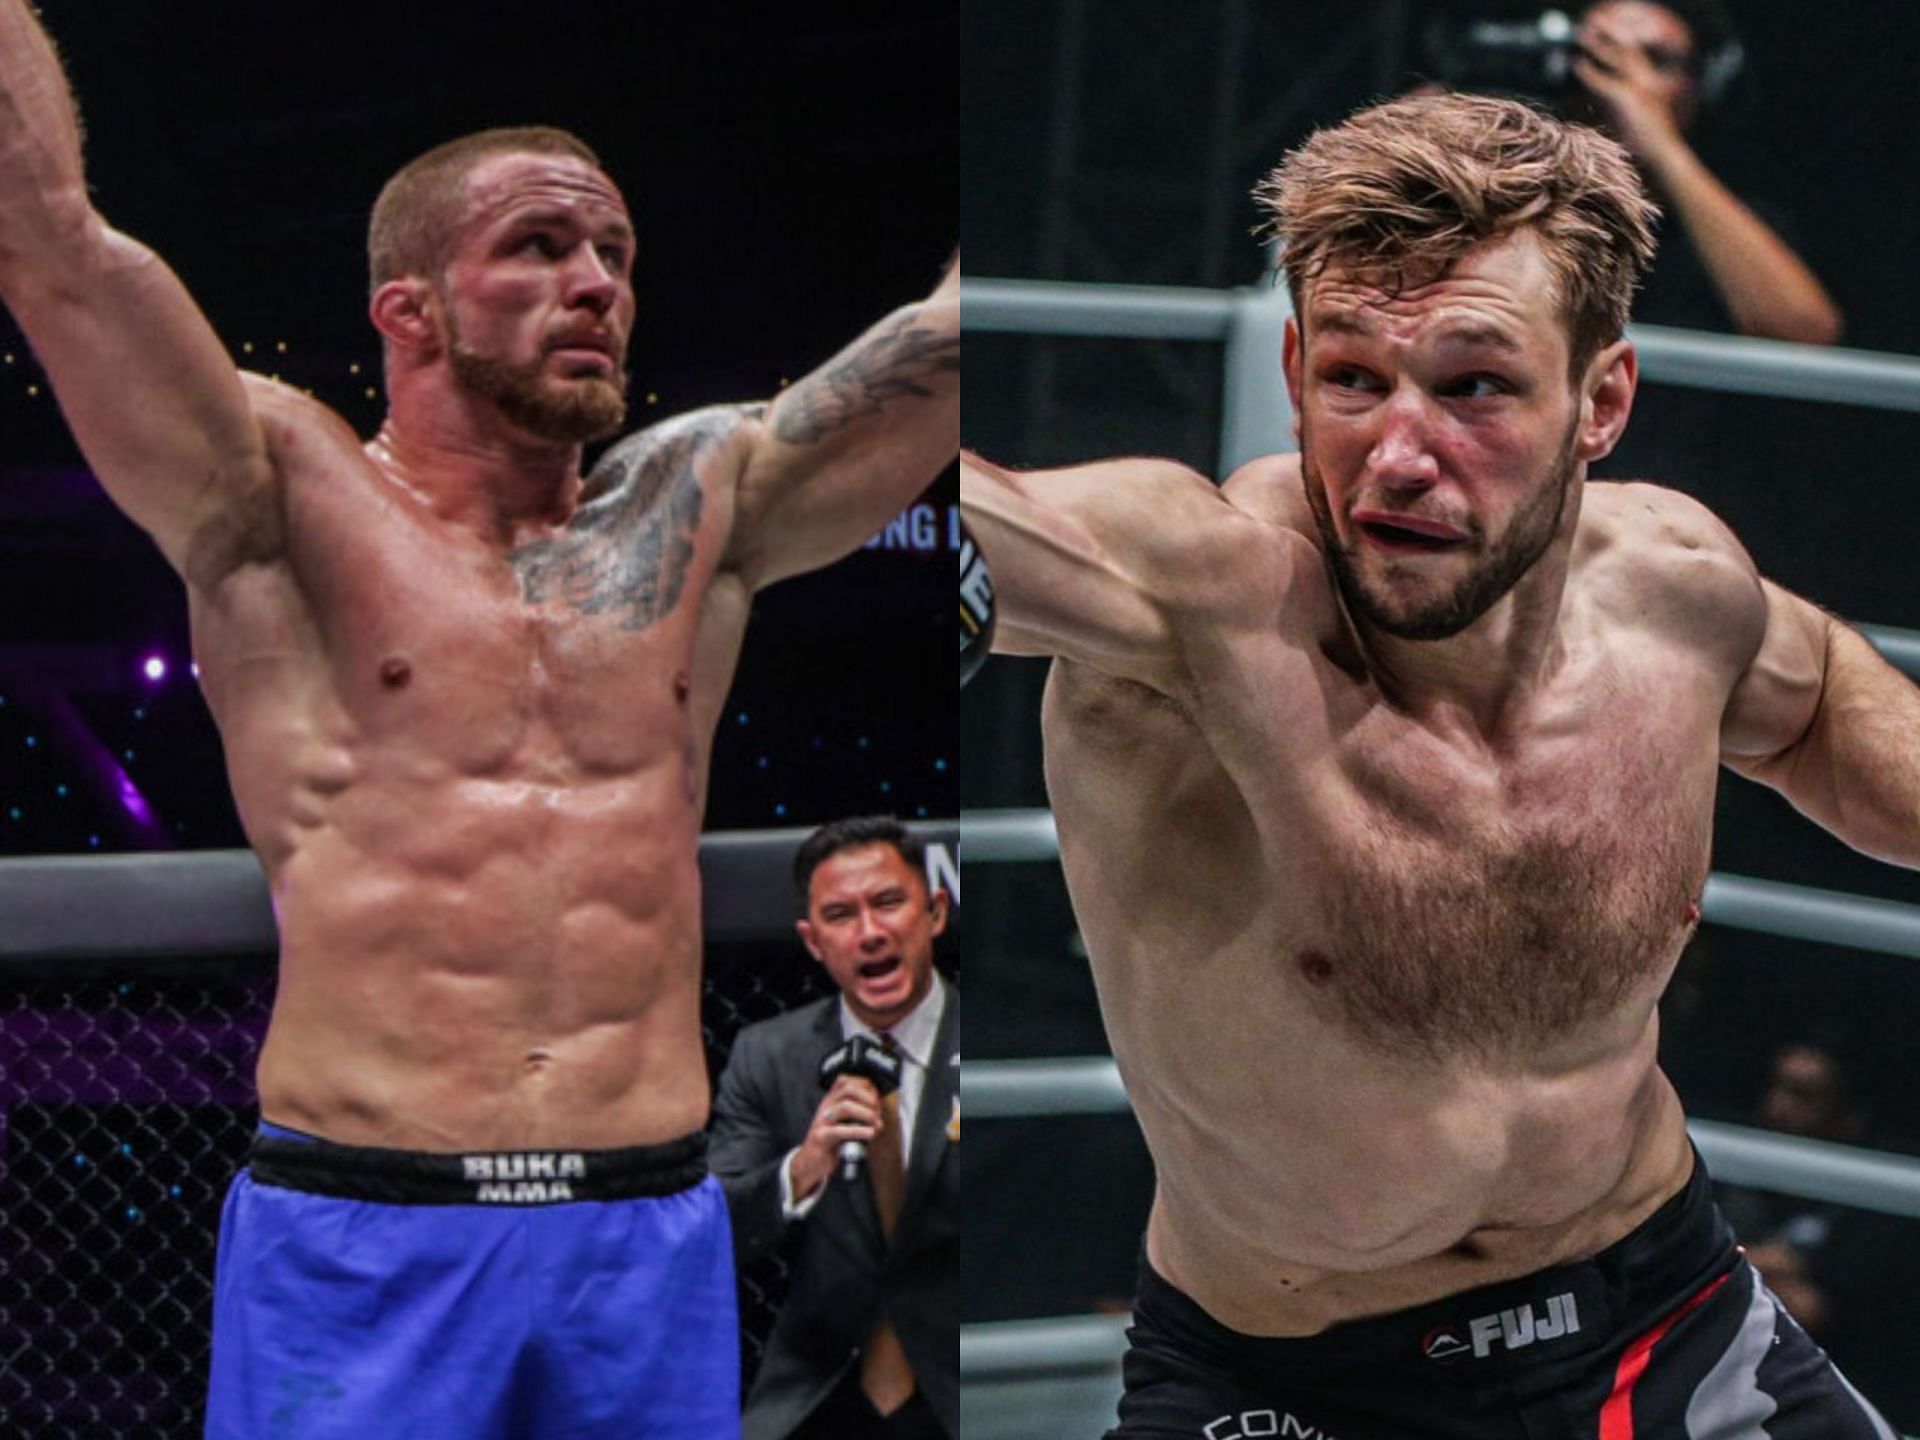 Vitaly Bigdash (left) and Reinier de Ridder (right). [Photo: ONE Championship]